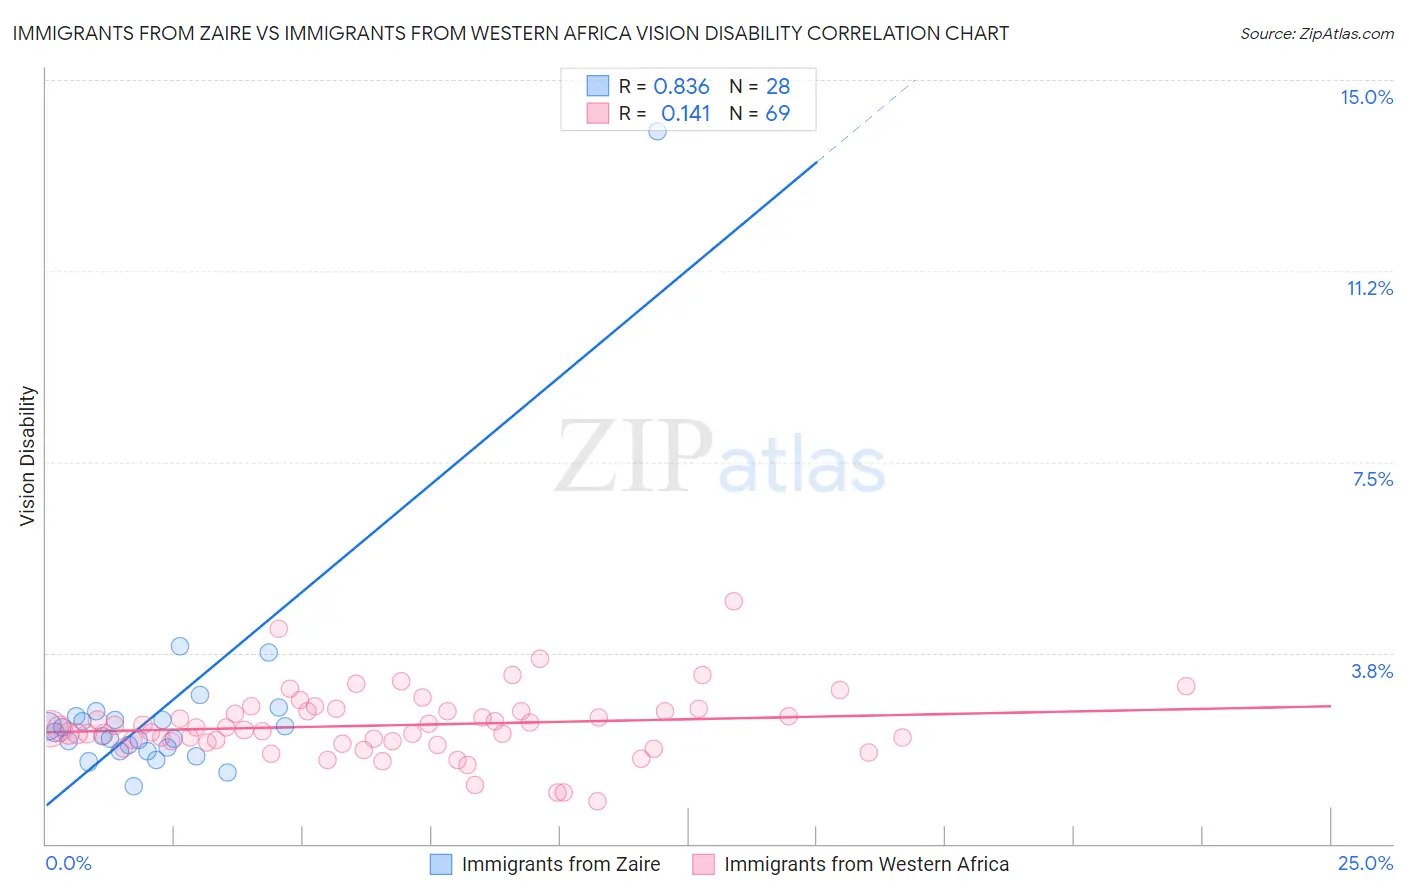 Immigrants from Zaire vs Immigrants from Western Africa Vision Disability